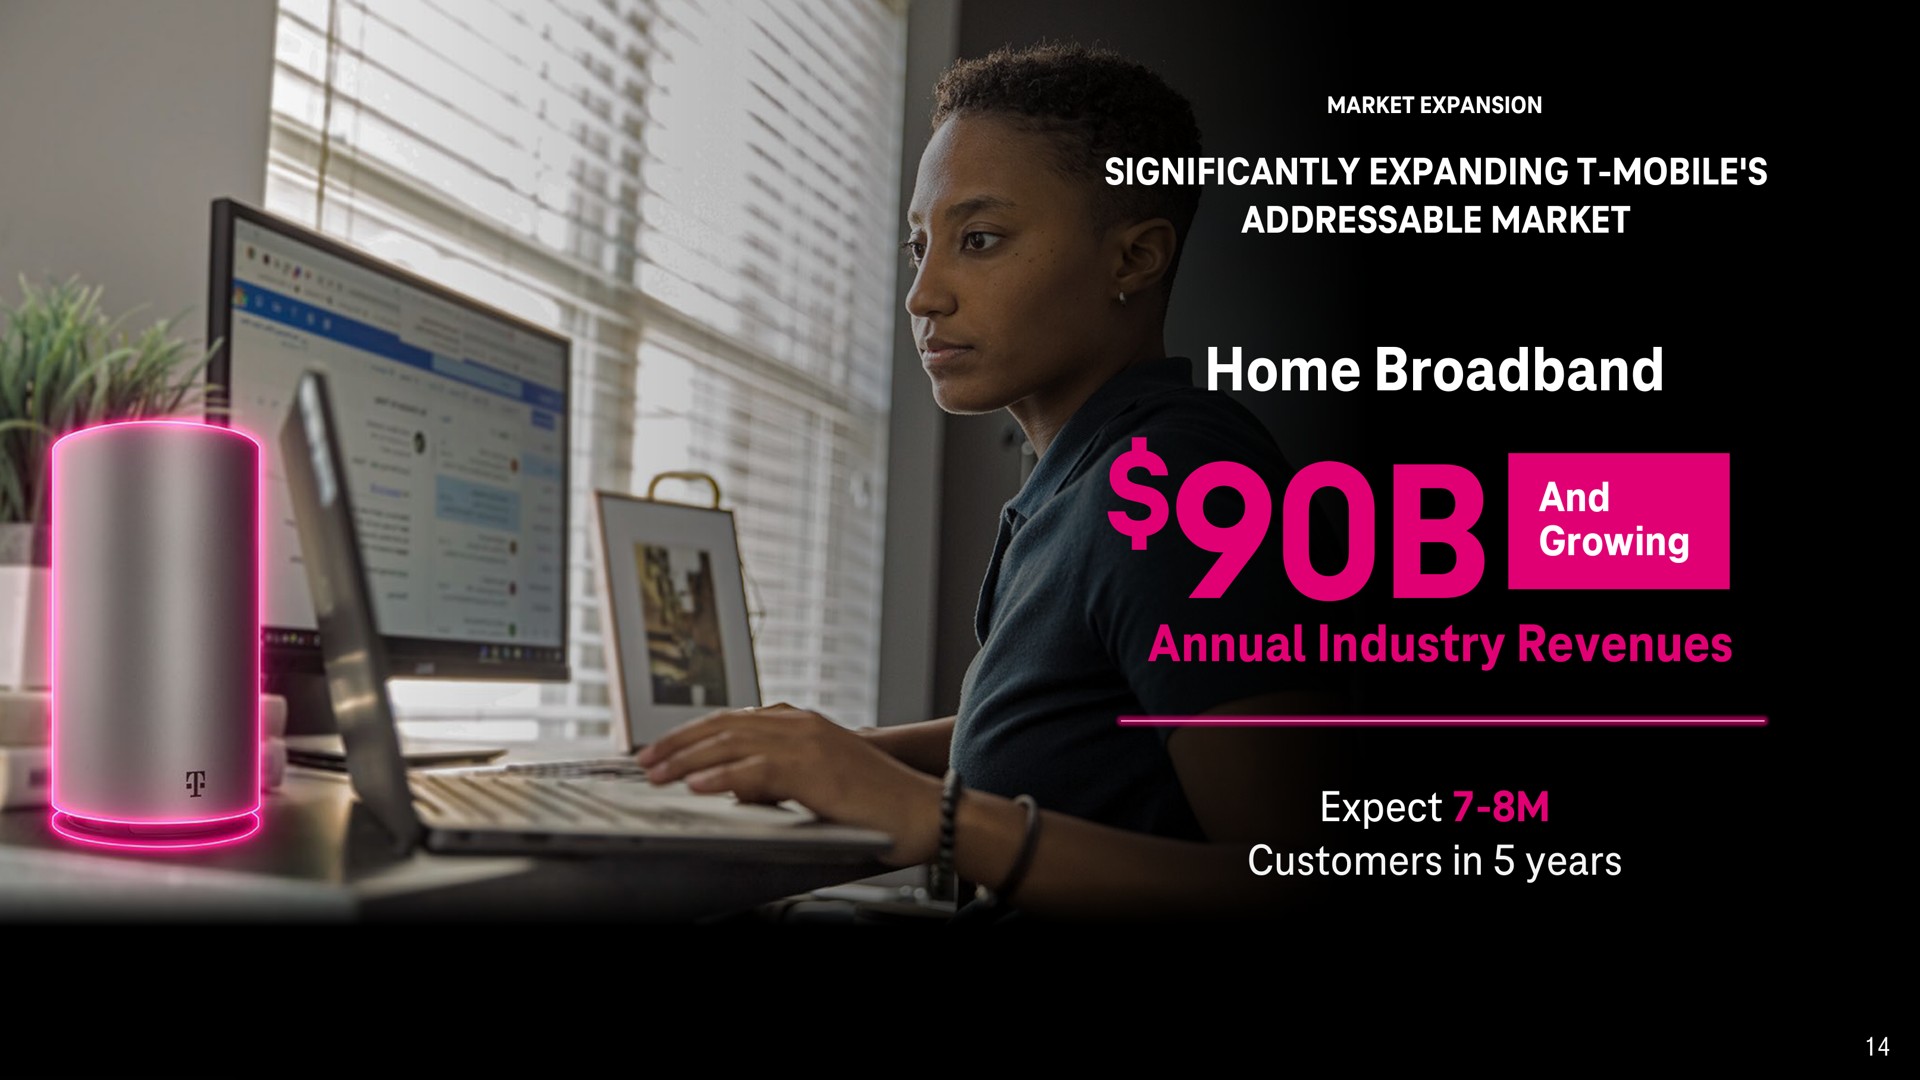 home and annual industry revenues | T-Mobile